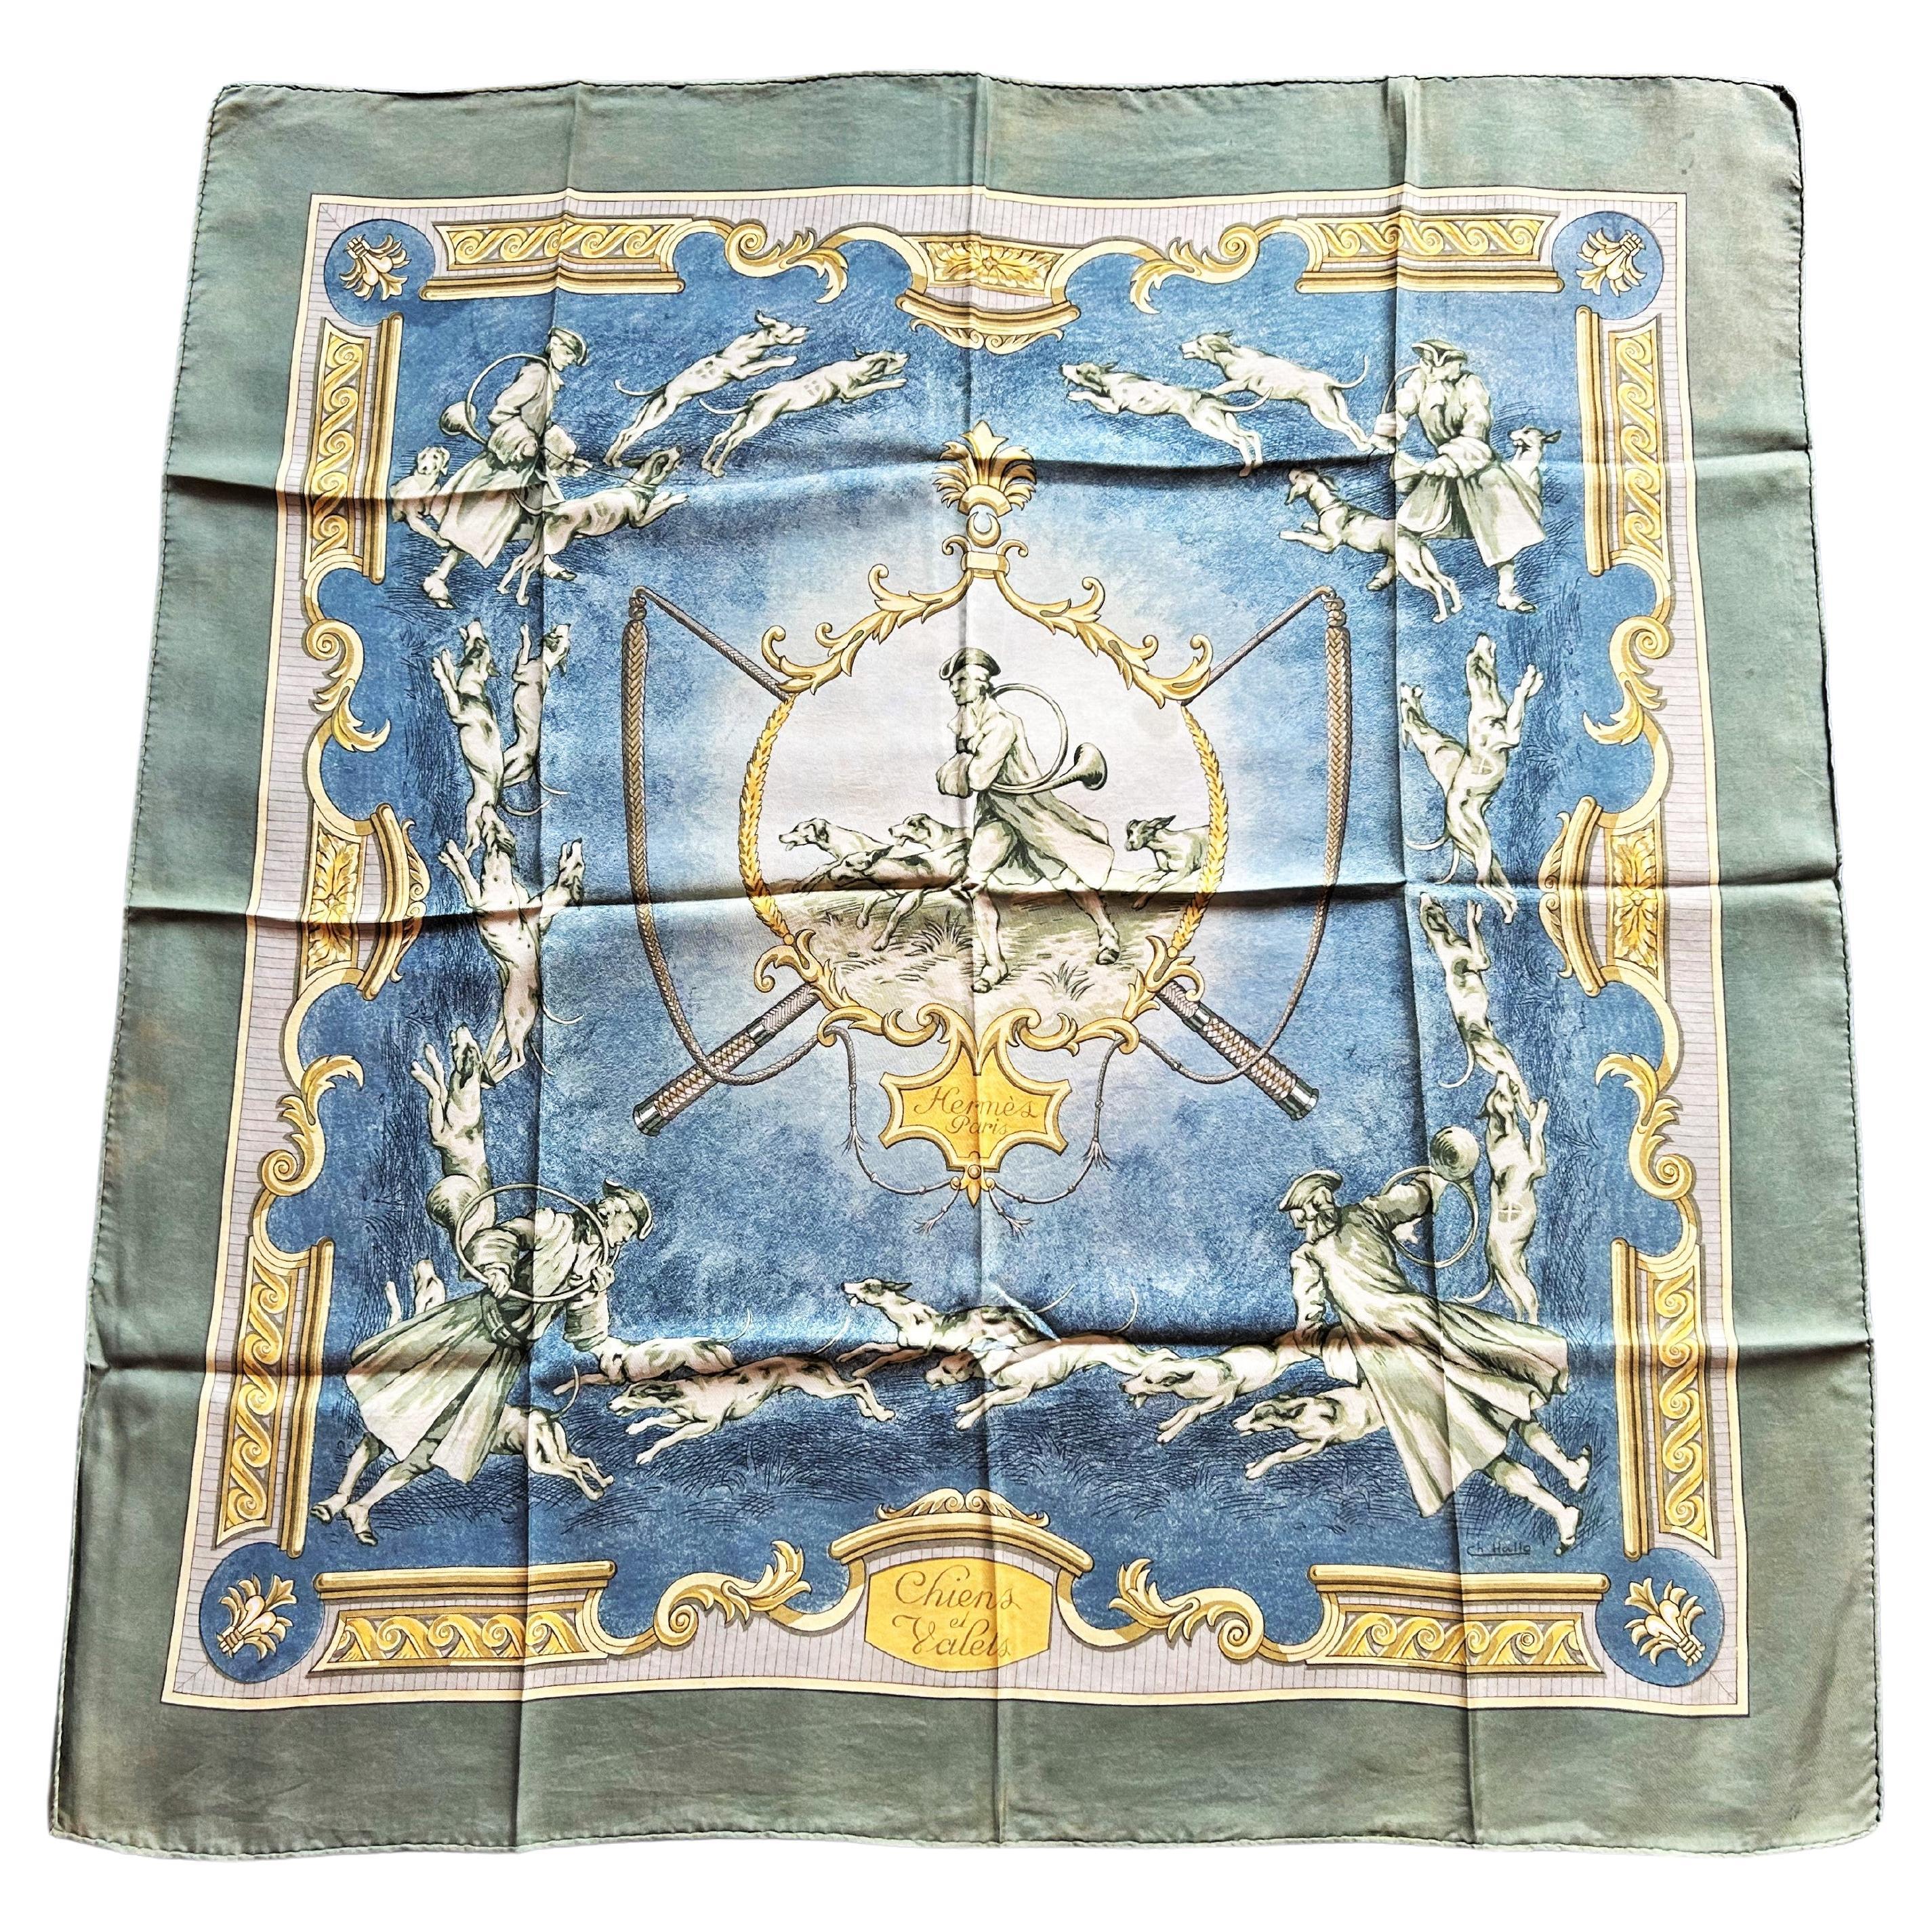 Circa 1965
France 

A Vintage Hermès silk scarf entitled Chiens et Valets in silk twill printed in shades of blue, golden yellow and greenish. This is most likely the first edition of a design by Jean-Charles Hallo dating from 1965. A second, later